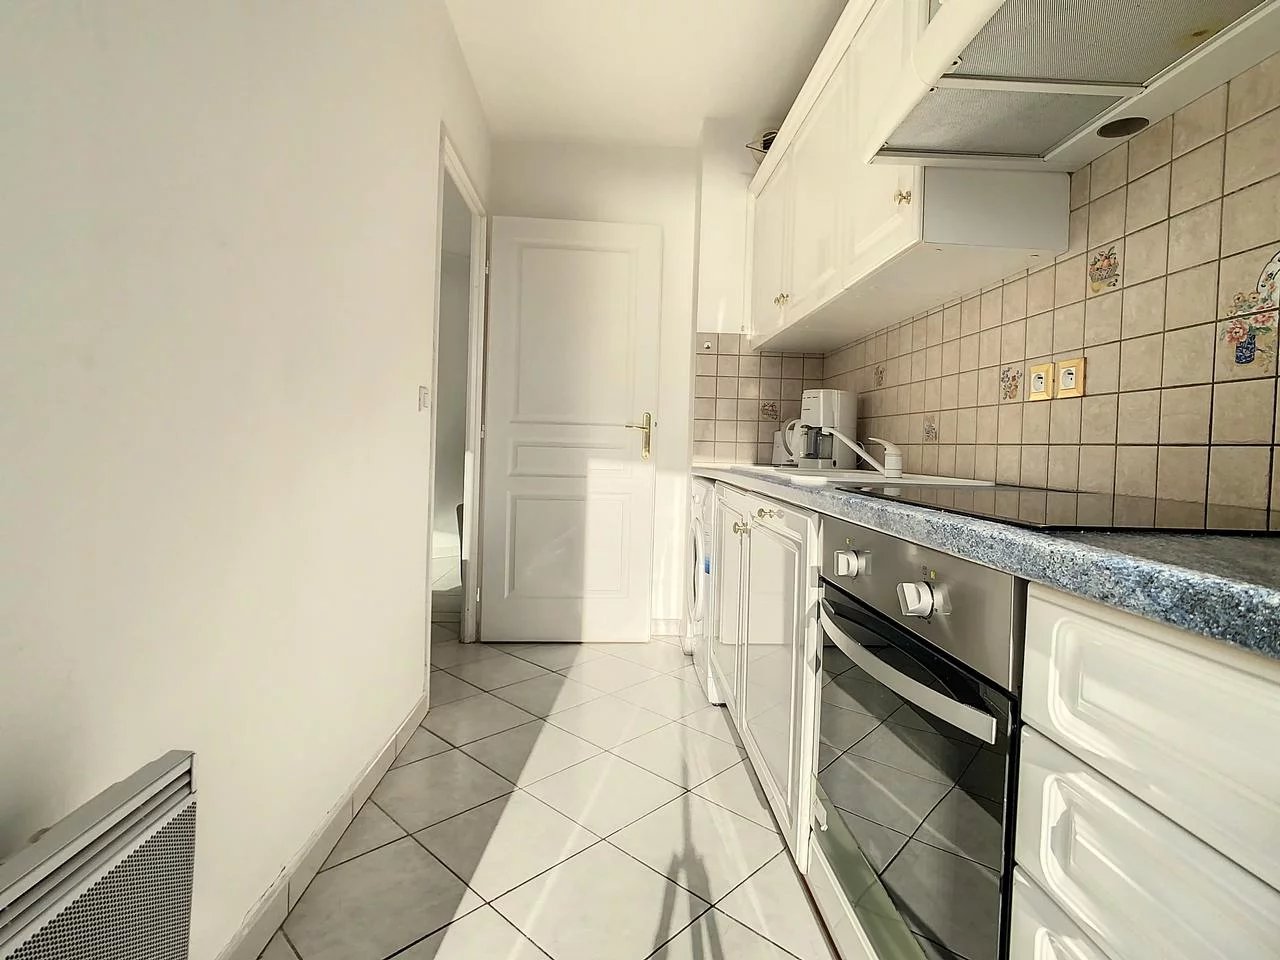 Appartement  3 Rooms 59m2  for sale   495 000 €